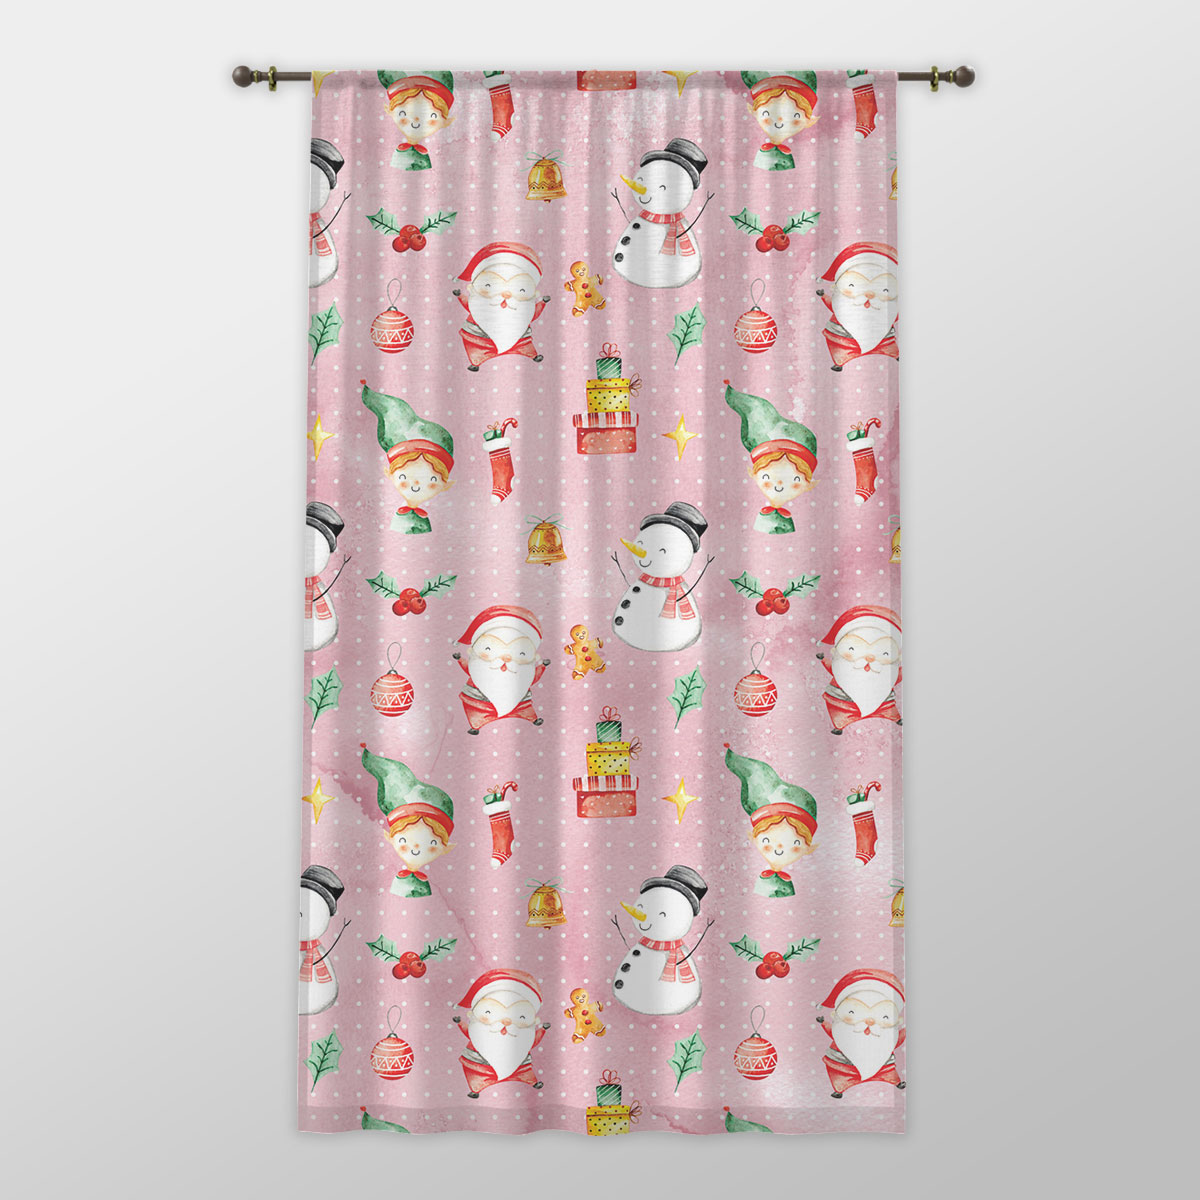 Santa Clause, Snowman And Christmas Elf With Christmas Gifts One-side Printed Window Curtain